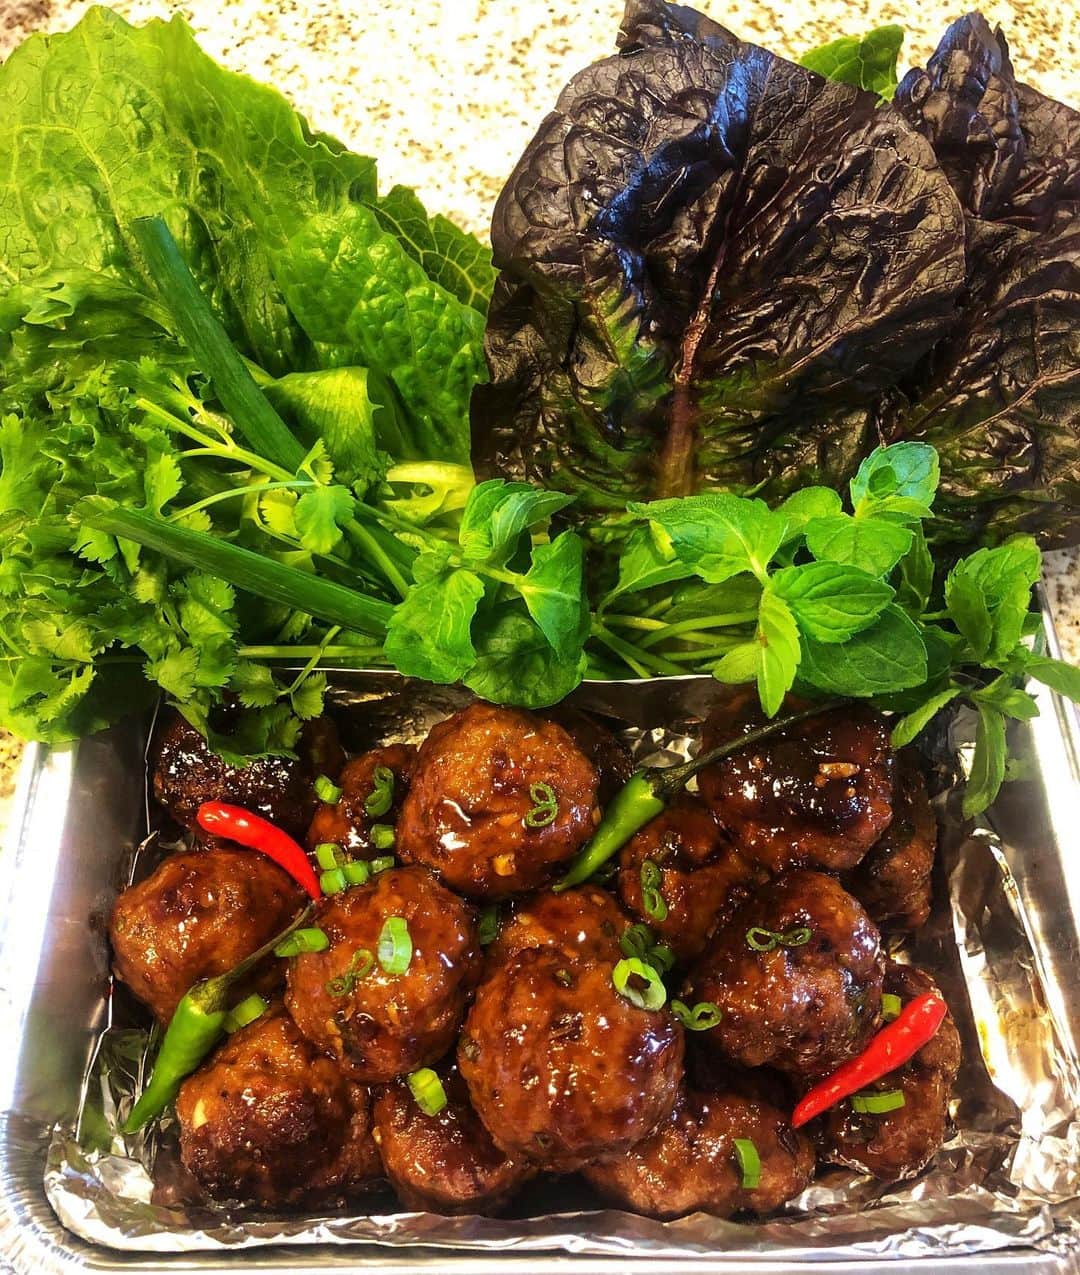 Jada Lalita Patipaksiriのインスタグラム：「About to make a special delivery for my parents 🥡🥢 Sticky Asian meatballs with flavors like soy sauce, garlic and chili paste🌶🧆Super yummy on a bed of white rice 🍚 as an entree or with greens🥬 if you’re looking to have it as a lettuce wrap appetizer or simply a lighter option 👩🏻‍🌾🍽 #meatballs #tasty #dinner #yum #foodpics #foodie #yummy #thaispice #food #thaifood #cooking #thailand #dinner #spicyfood #garlic #recipe #lettucewrap #cooking #rice #spicy #kitchen #cookbook #chef #takeout #appetizer #soysauce」